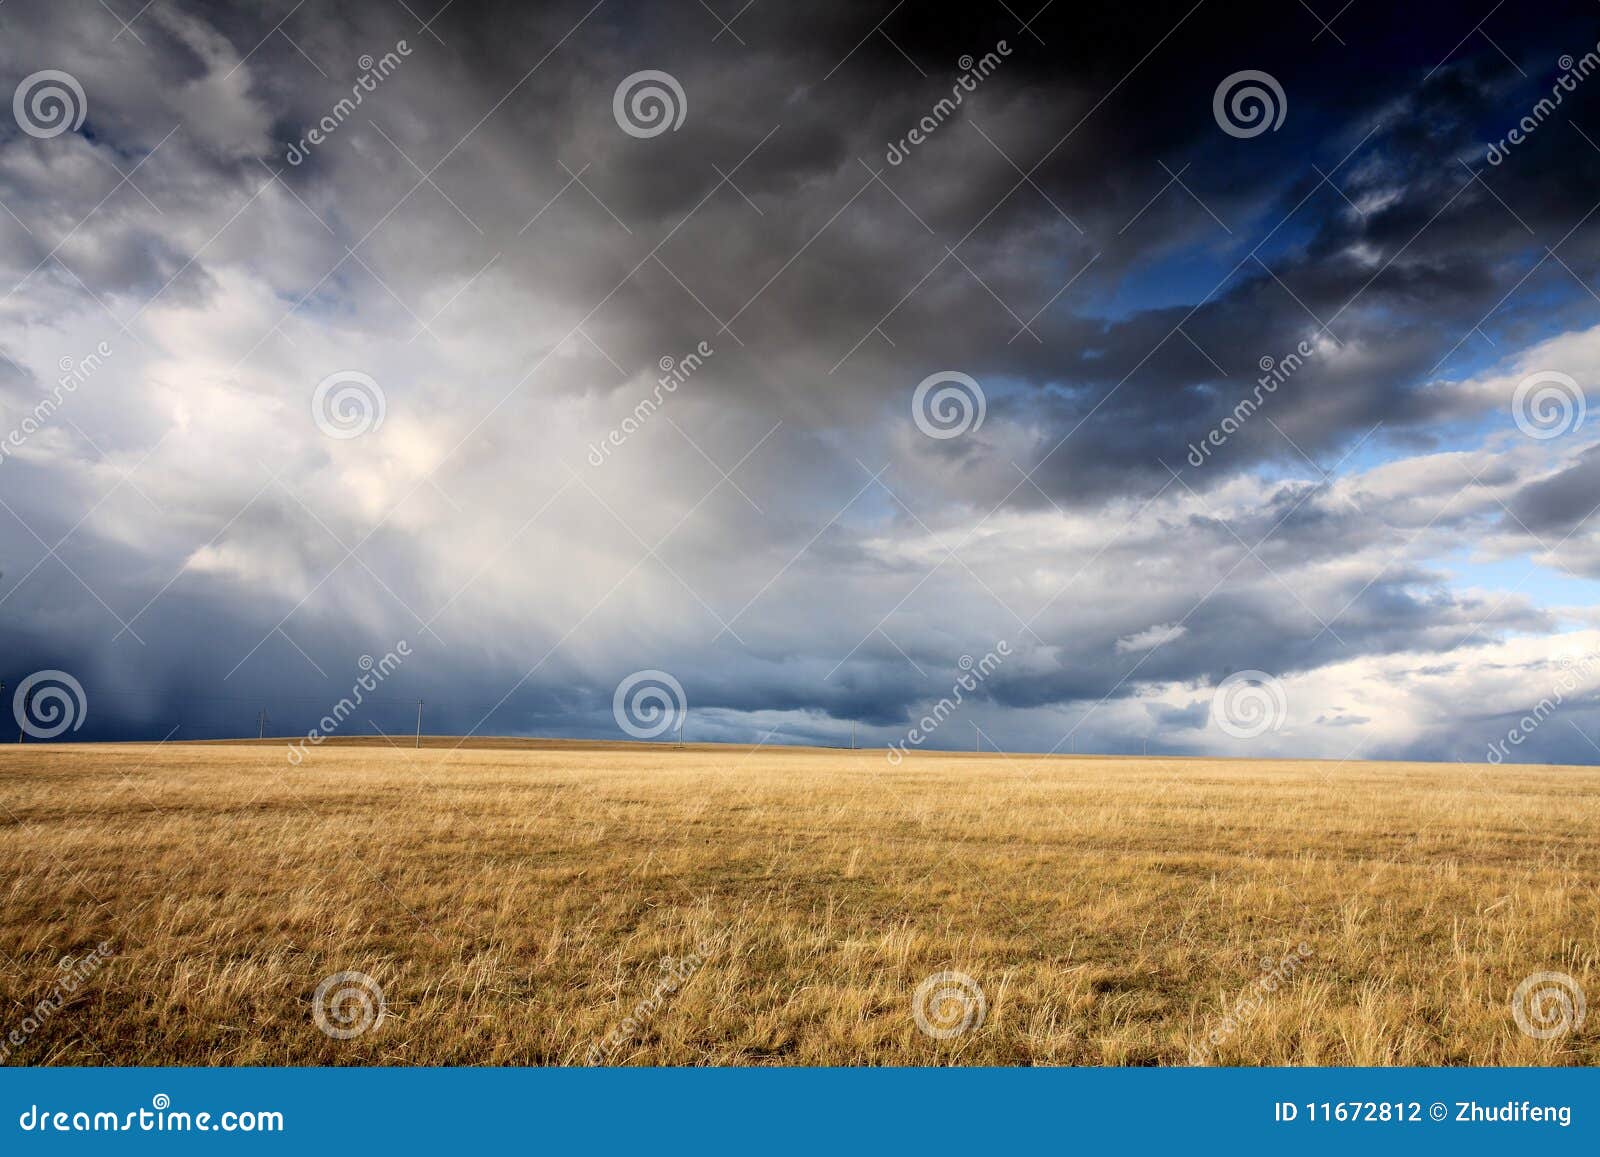 cloudy sky and meadow